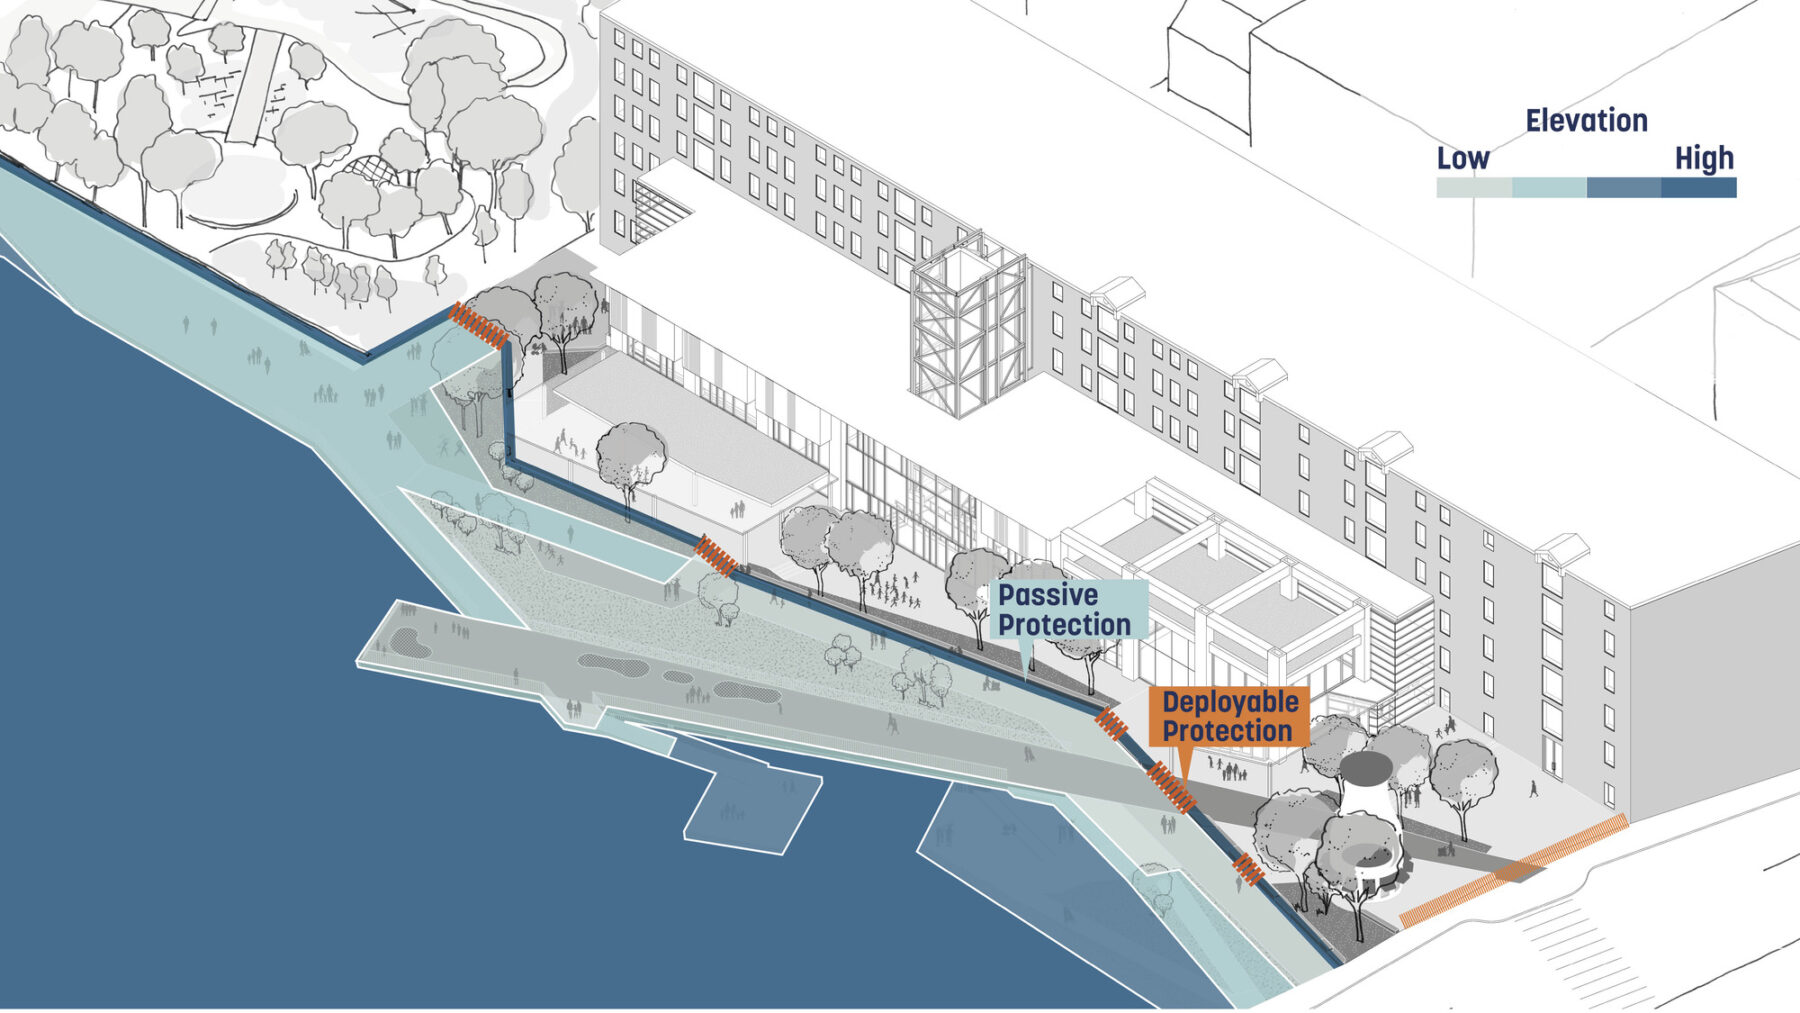 illustrative plan of waterfront indicating the changes in elevation